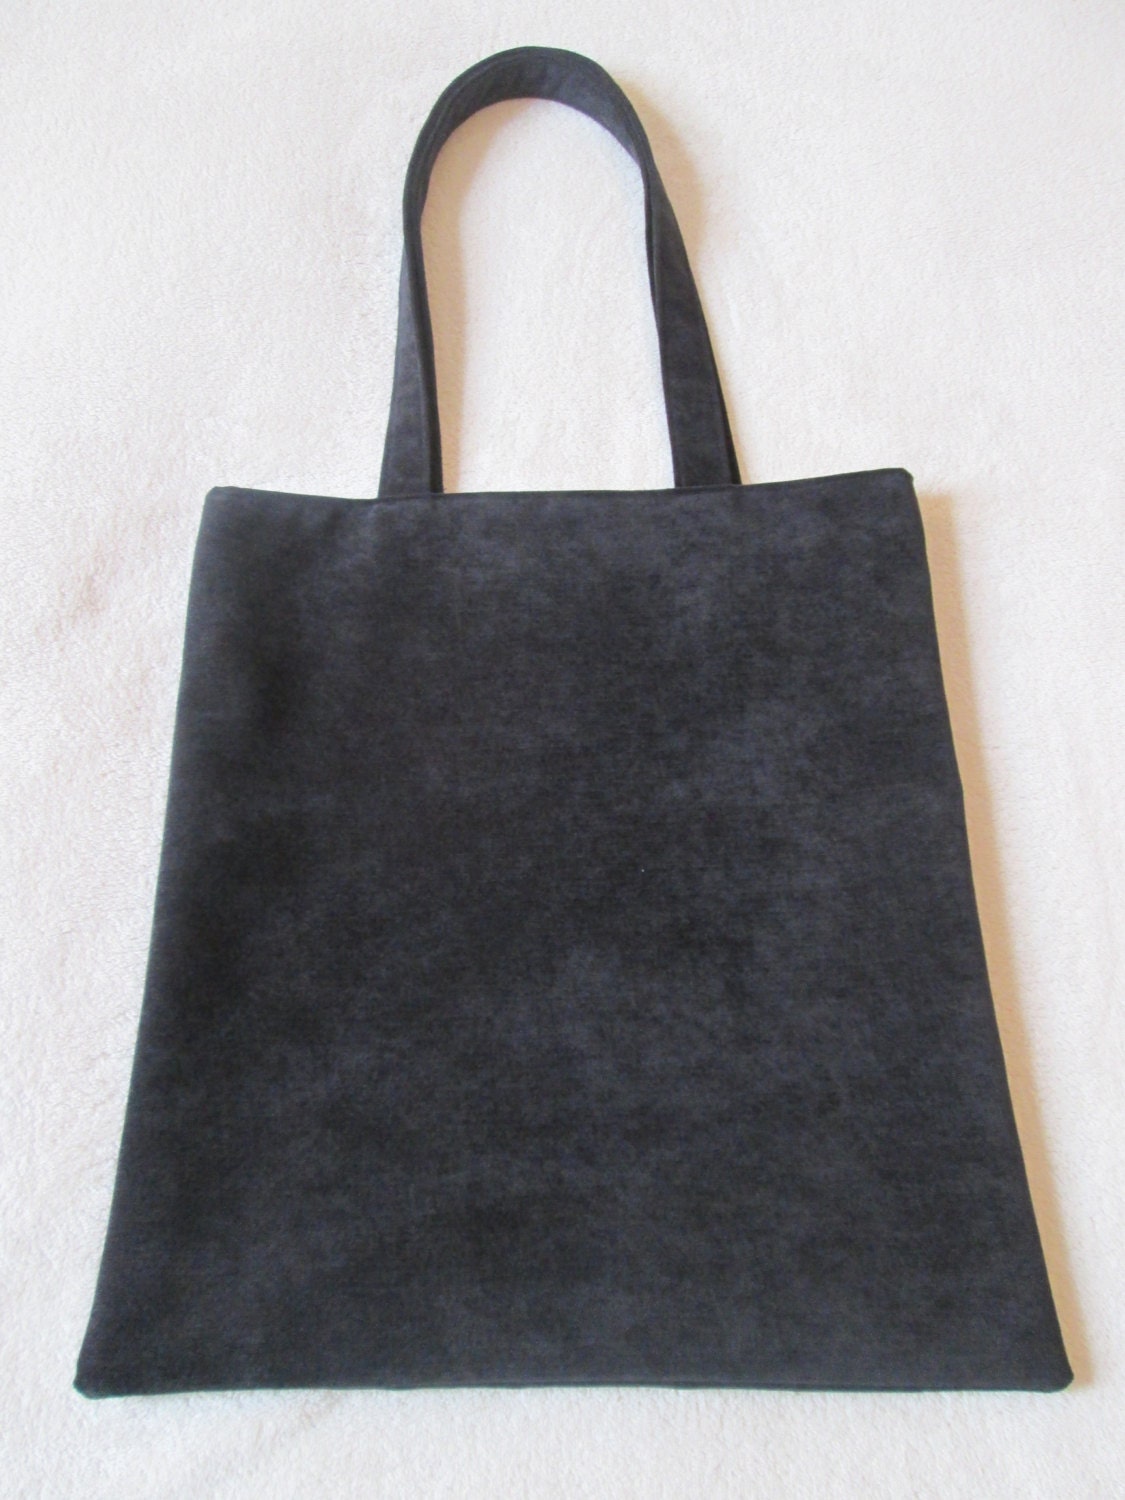 Beautifully finished Velvety Black Tote Bag by NoSecondLikeYours